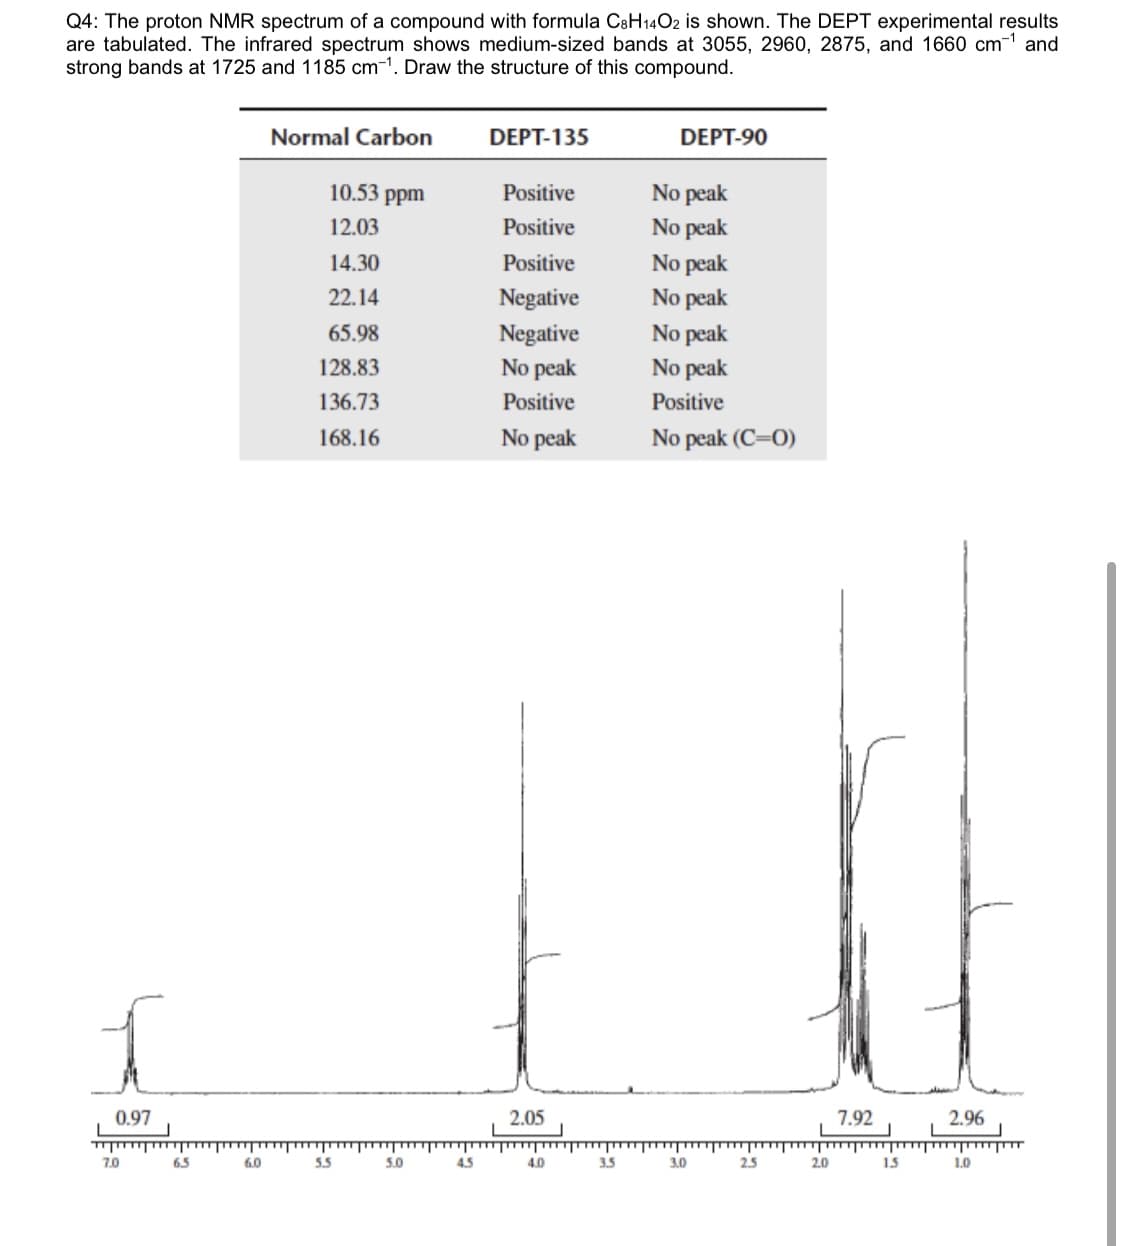 Q4: The proton NMR spectrum of a compound with formula C8H14O2 is shown. The DEPT experimental results
are tabulated. The infrared spectrum shows medium-sized bands at 3055, 2960, 2875, and 1660 cm-1 and
strong bands at 1725 and 1185 cm-1. Draw the structure of this compound.
Normal Carbon
DEPT-135
DEPT-90
10.53 ppm
Positive
No peak
Positive
No peak
No peak
No peak
12.03
14.30
Positive
22.14
Negative
No peak
No peak
65.98
Negative
128.83
No peak
136.73
Positive
Positive
168.16
No peak
No peak (C=0)
0.97
2.05
7.92
2.96
7.0
6.5
60
5.5
5.0
4.5
4.0
3.5
3.0
2.5
2.0
1.5
1.0
